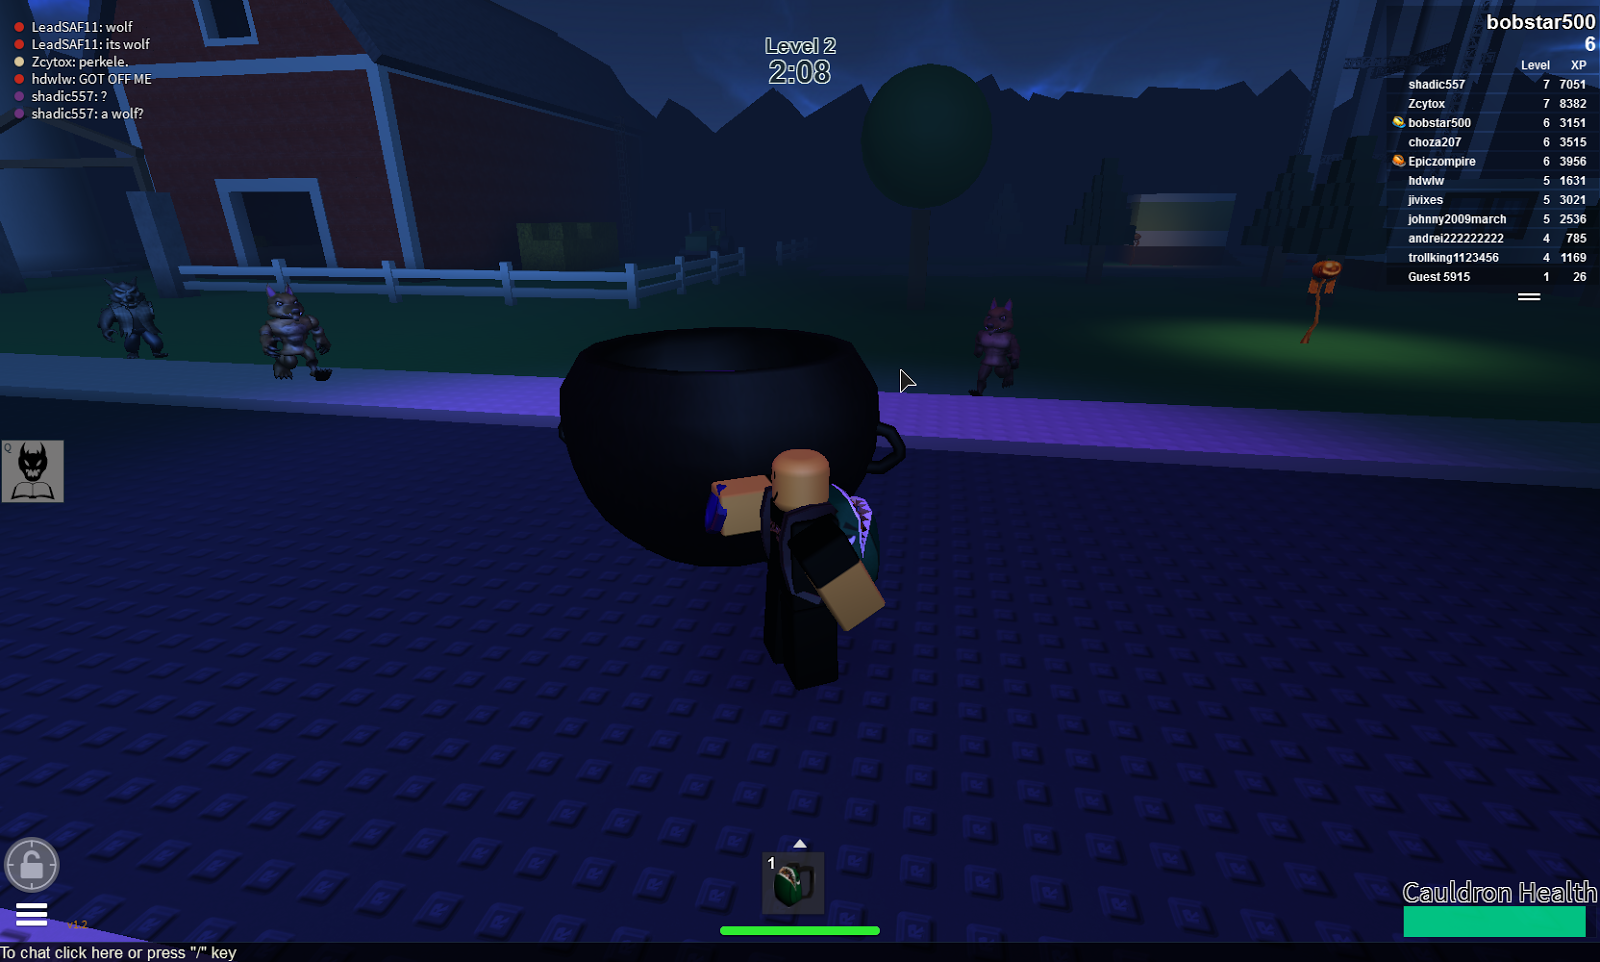 Unofficial Roblox Roblox Hallow S Eve 2014 Prizes Maps And Tutorials - roblox play as guest free